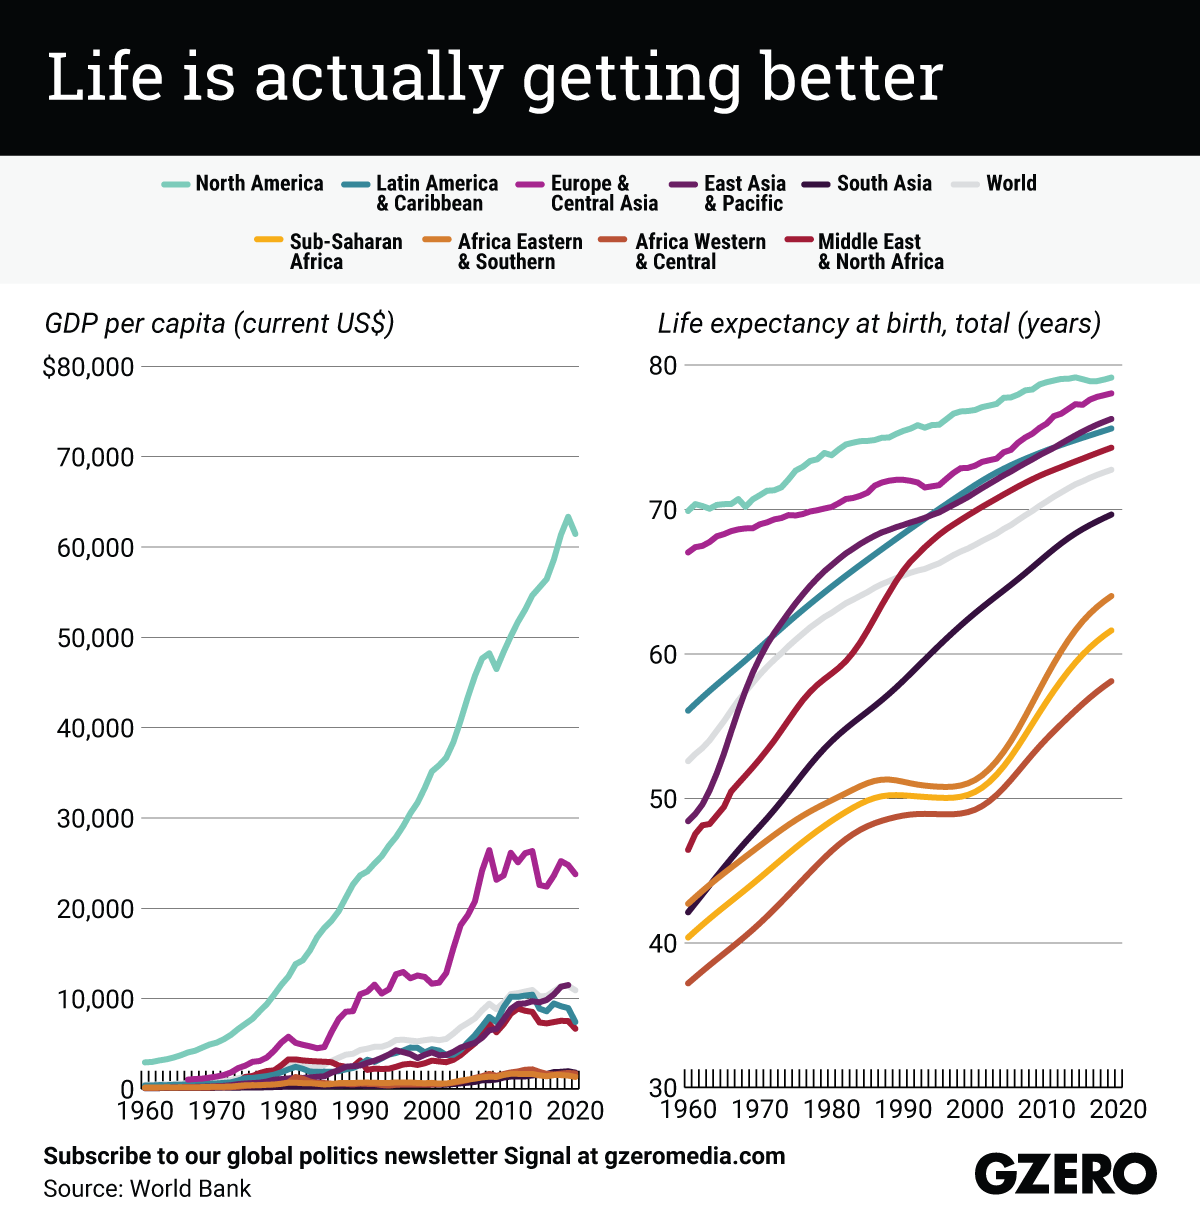 The Graphic Truth: Life is actually getting better